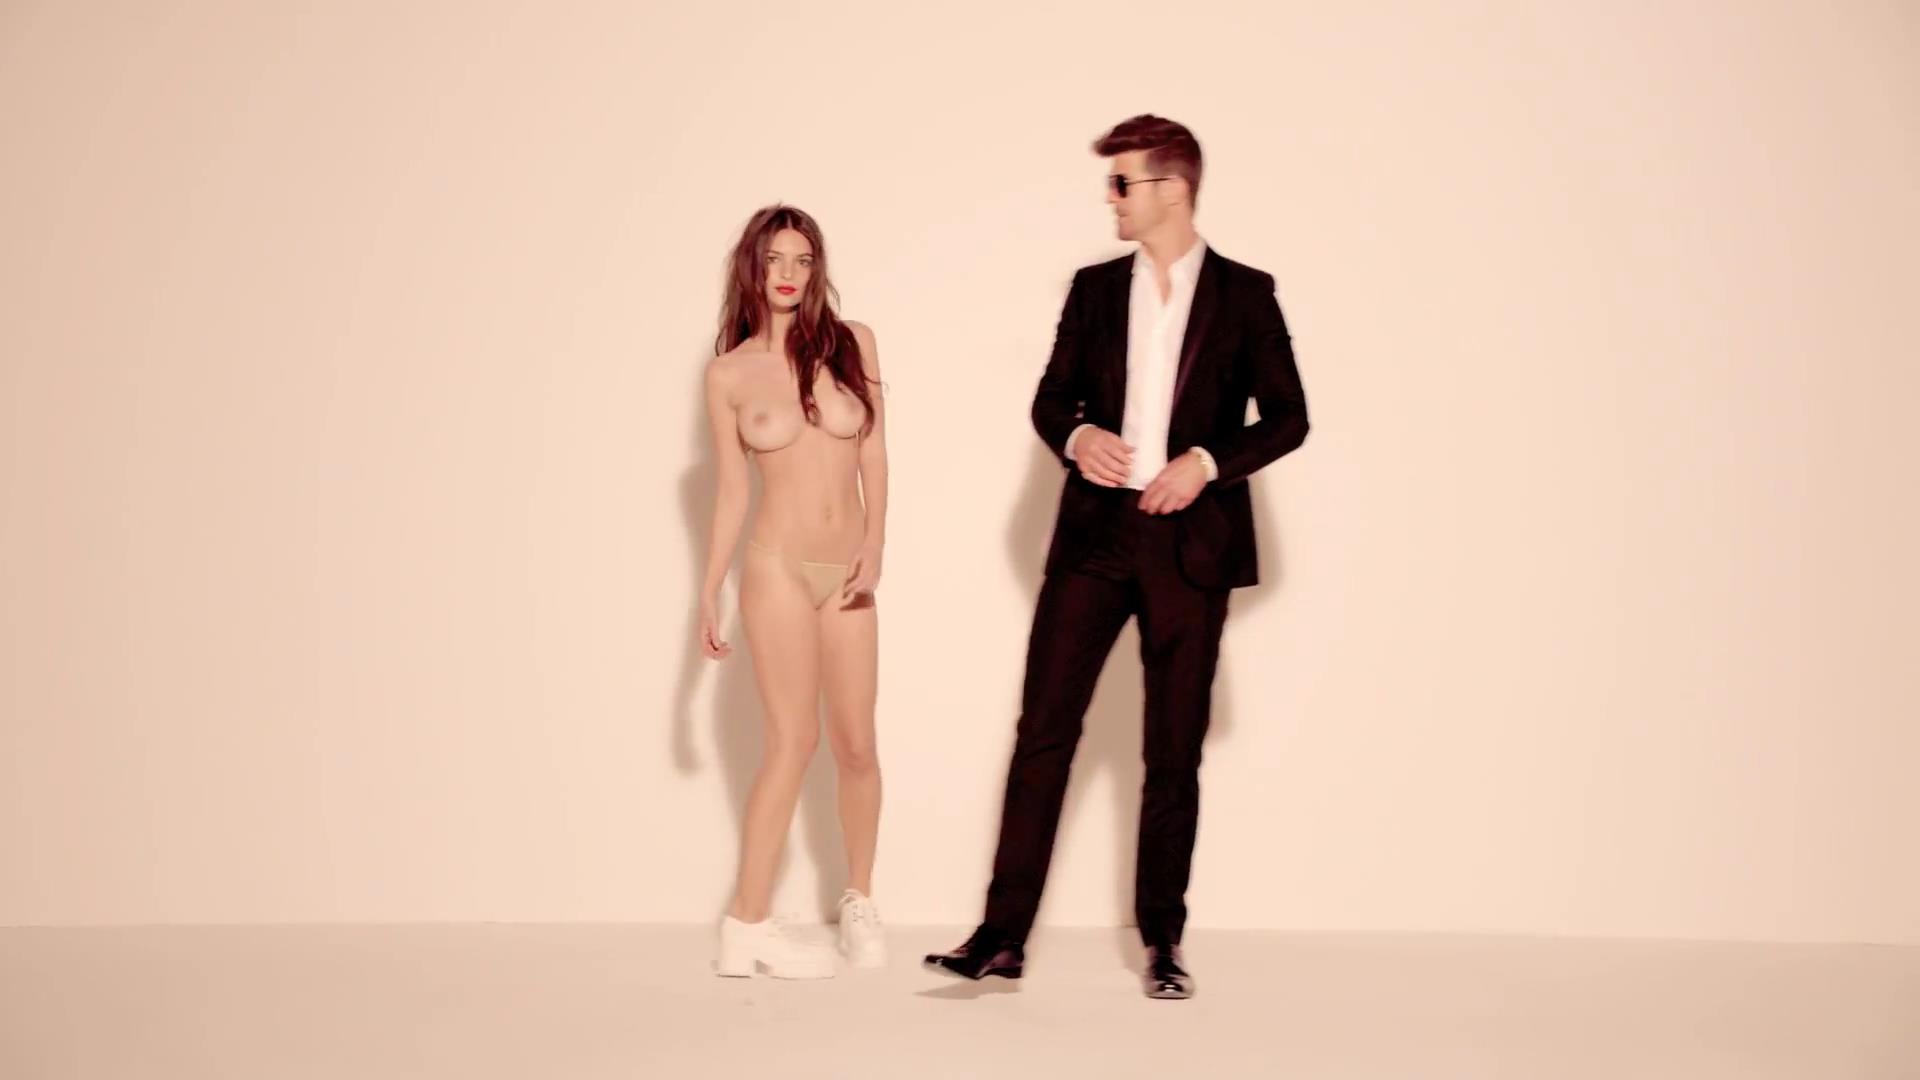 best of Unrated blurred robin thicke lines pharrell